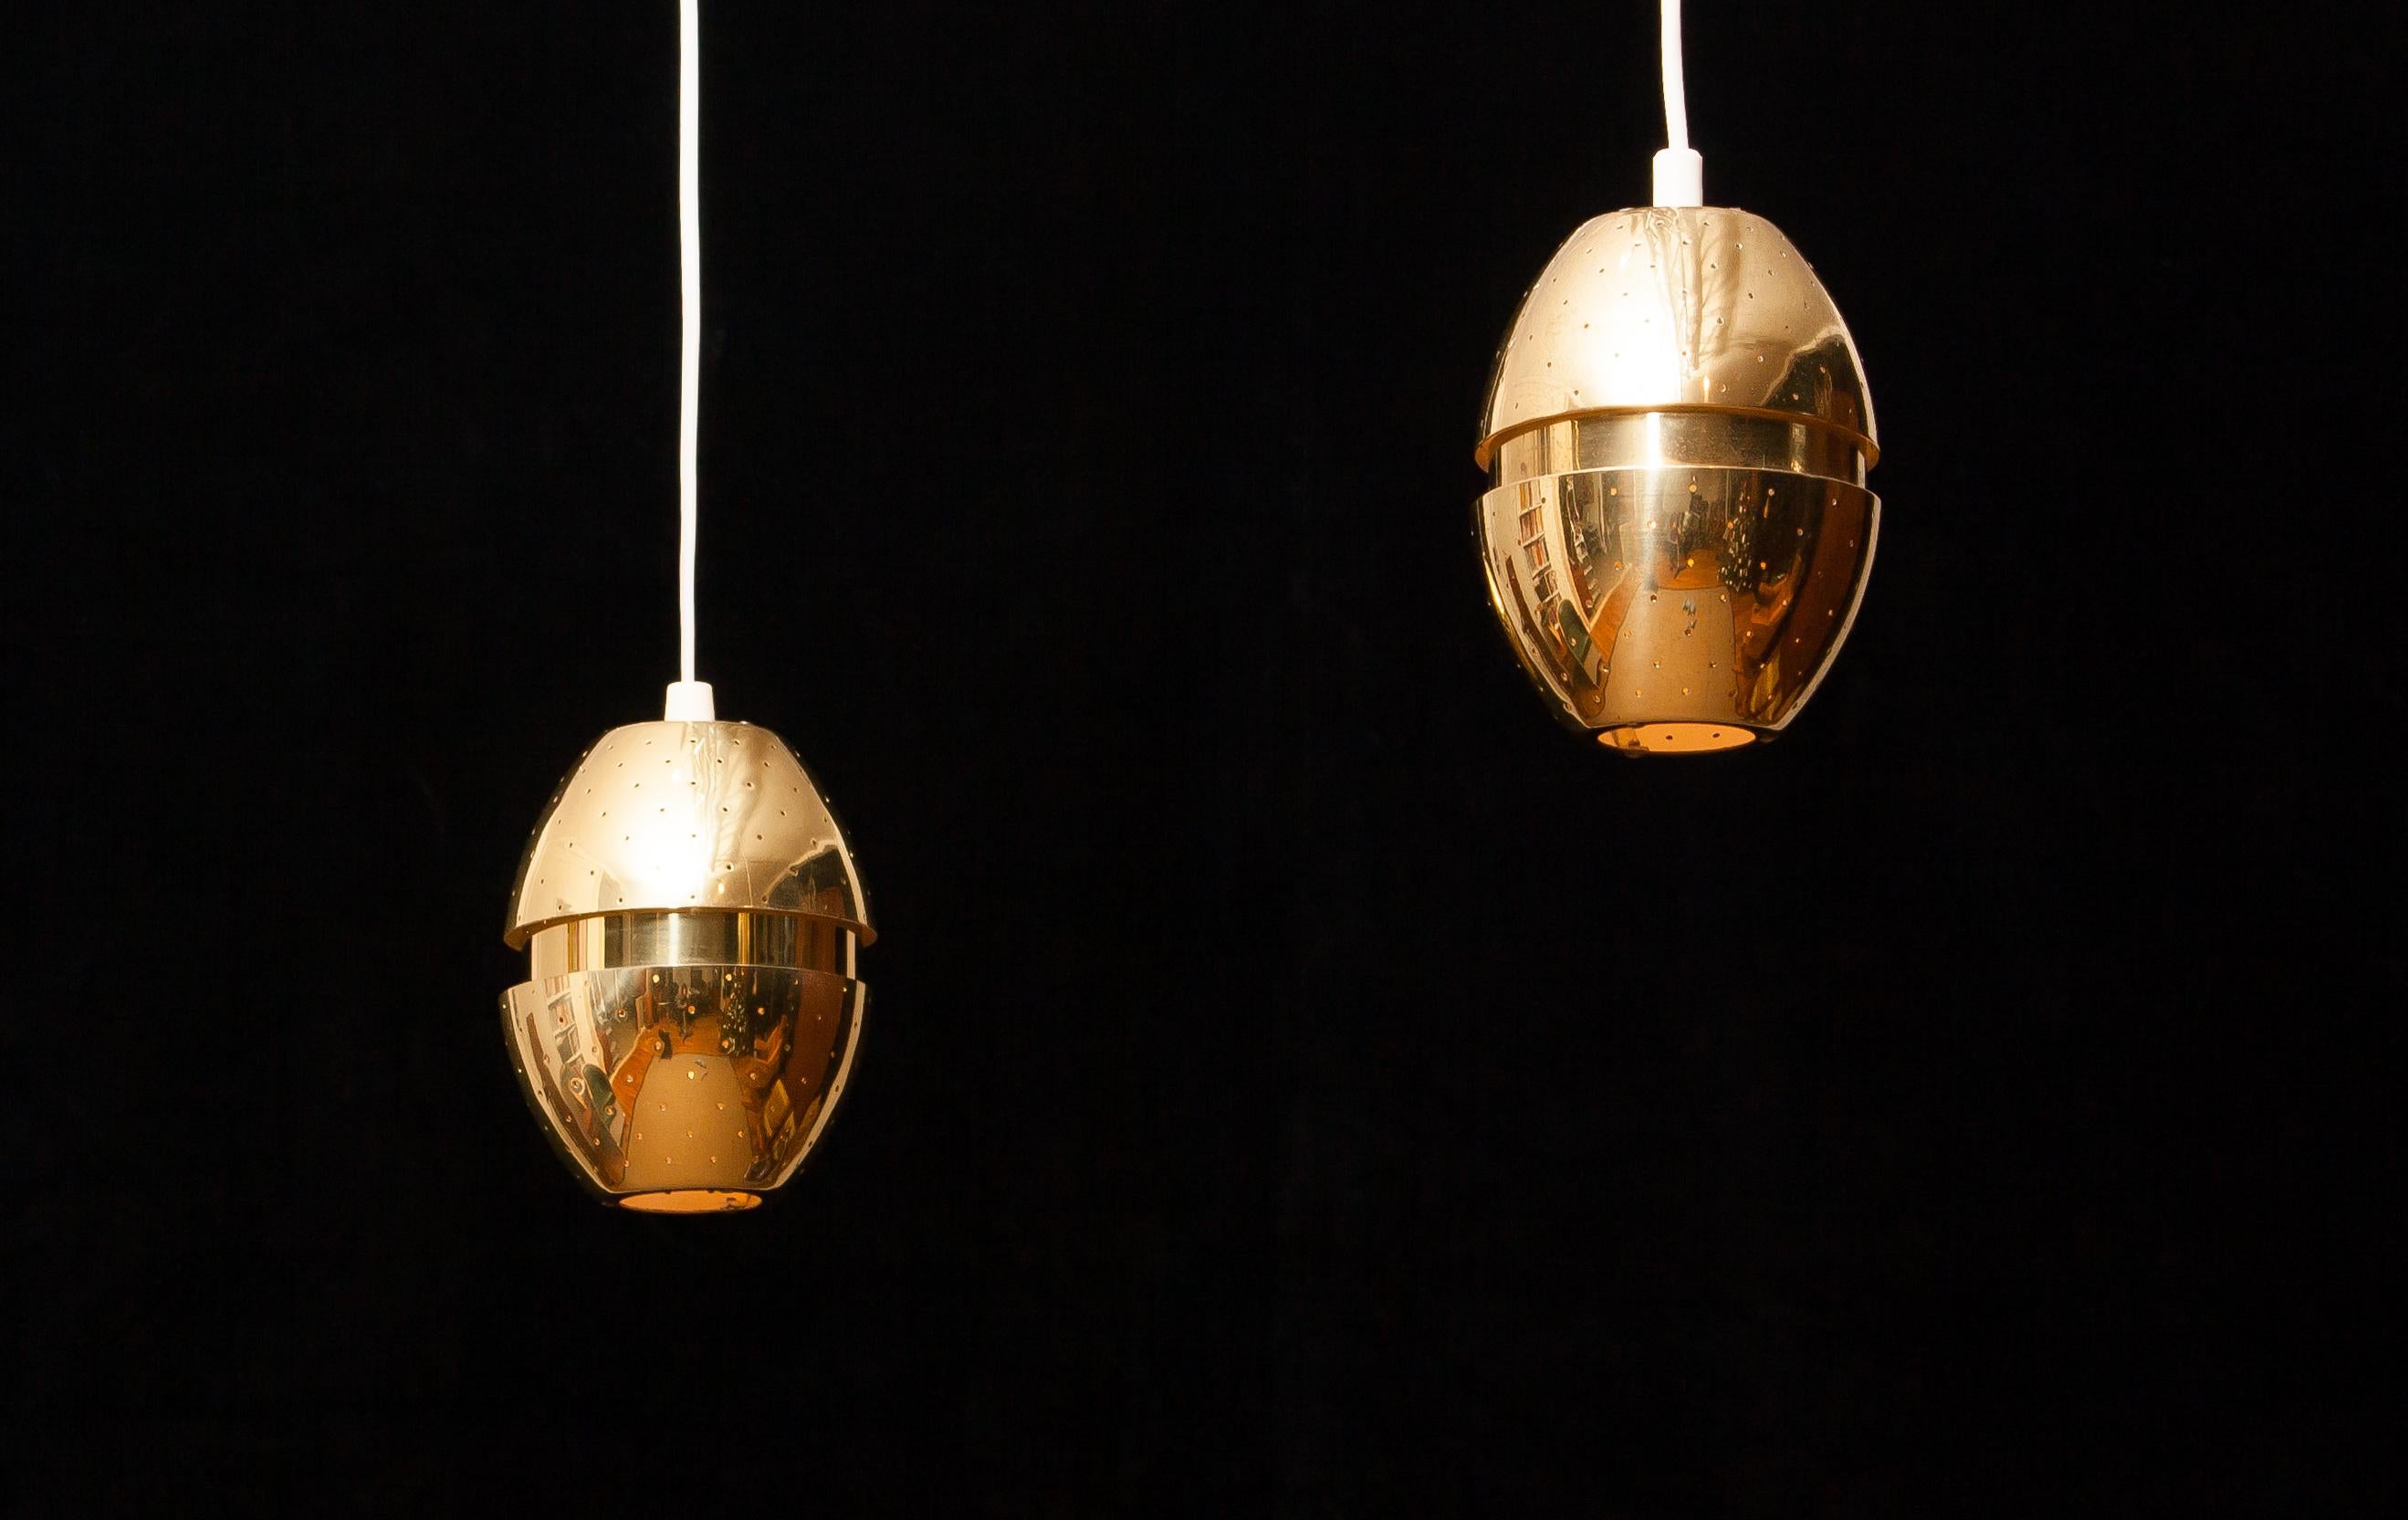 A beautiful pair of pendant lights designed by Hans-Agne Jakobsson, Sweden.
These lamps are made of brass and are perforated with gives a very nice shining.
They are in excellent condition.
Period 1950s
Dimensions: H 14 cm, ø 12 cm.